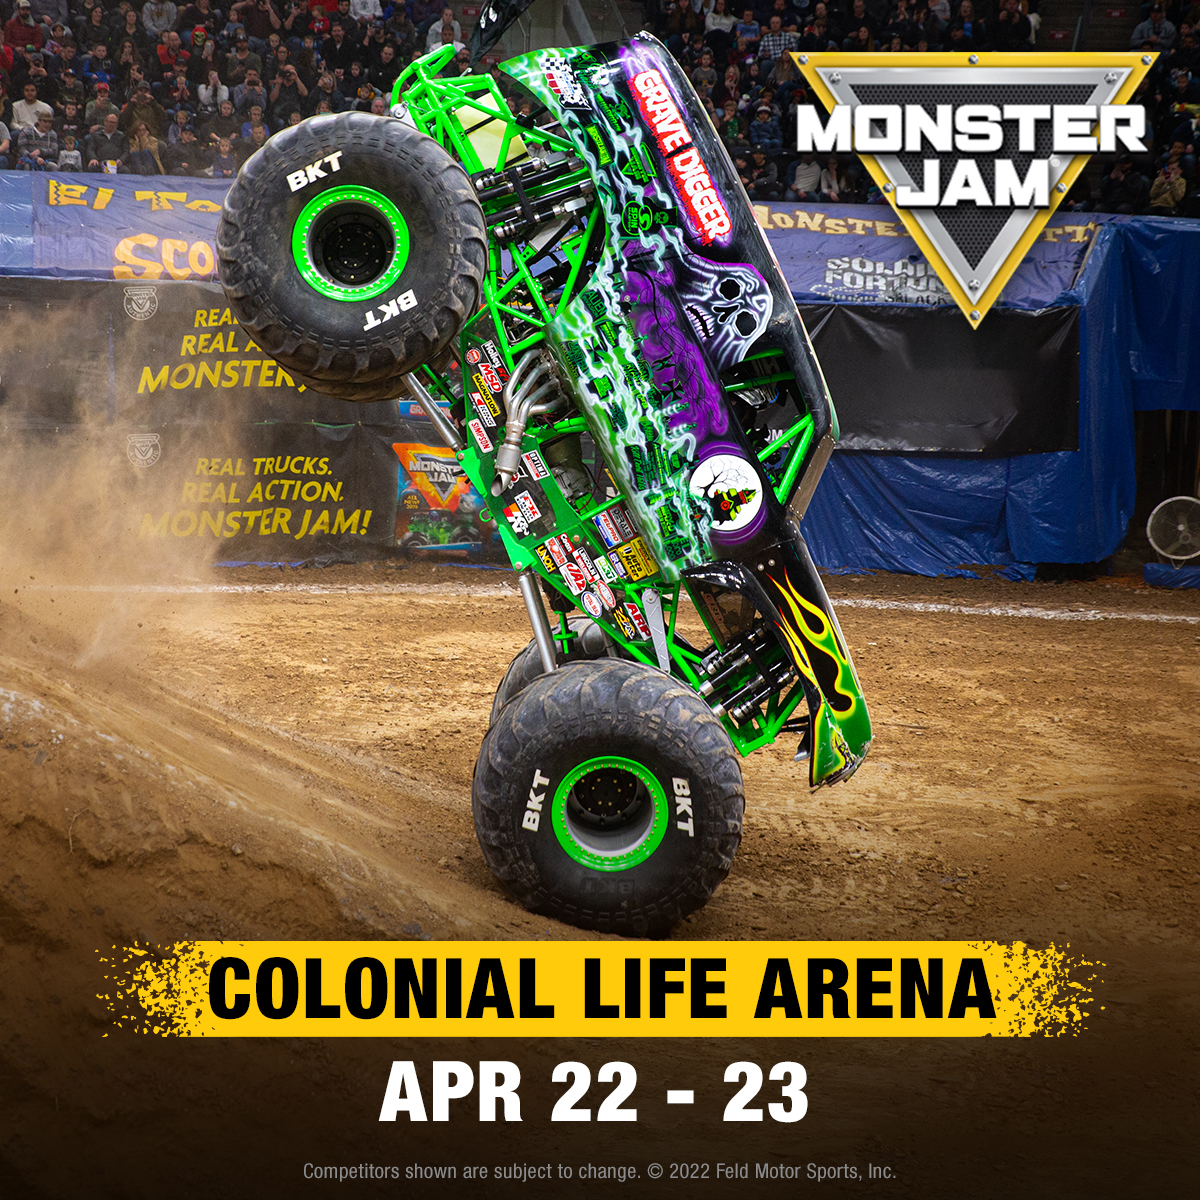 <h1 class="tribe-events-single-event-title">BIG DM Cash Contest Sponsored by Monster Jam</h1>